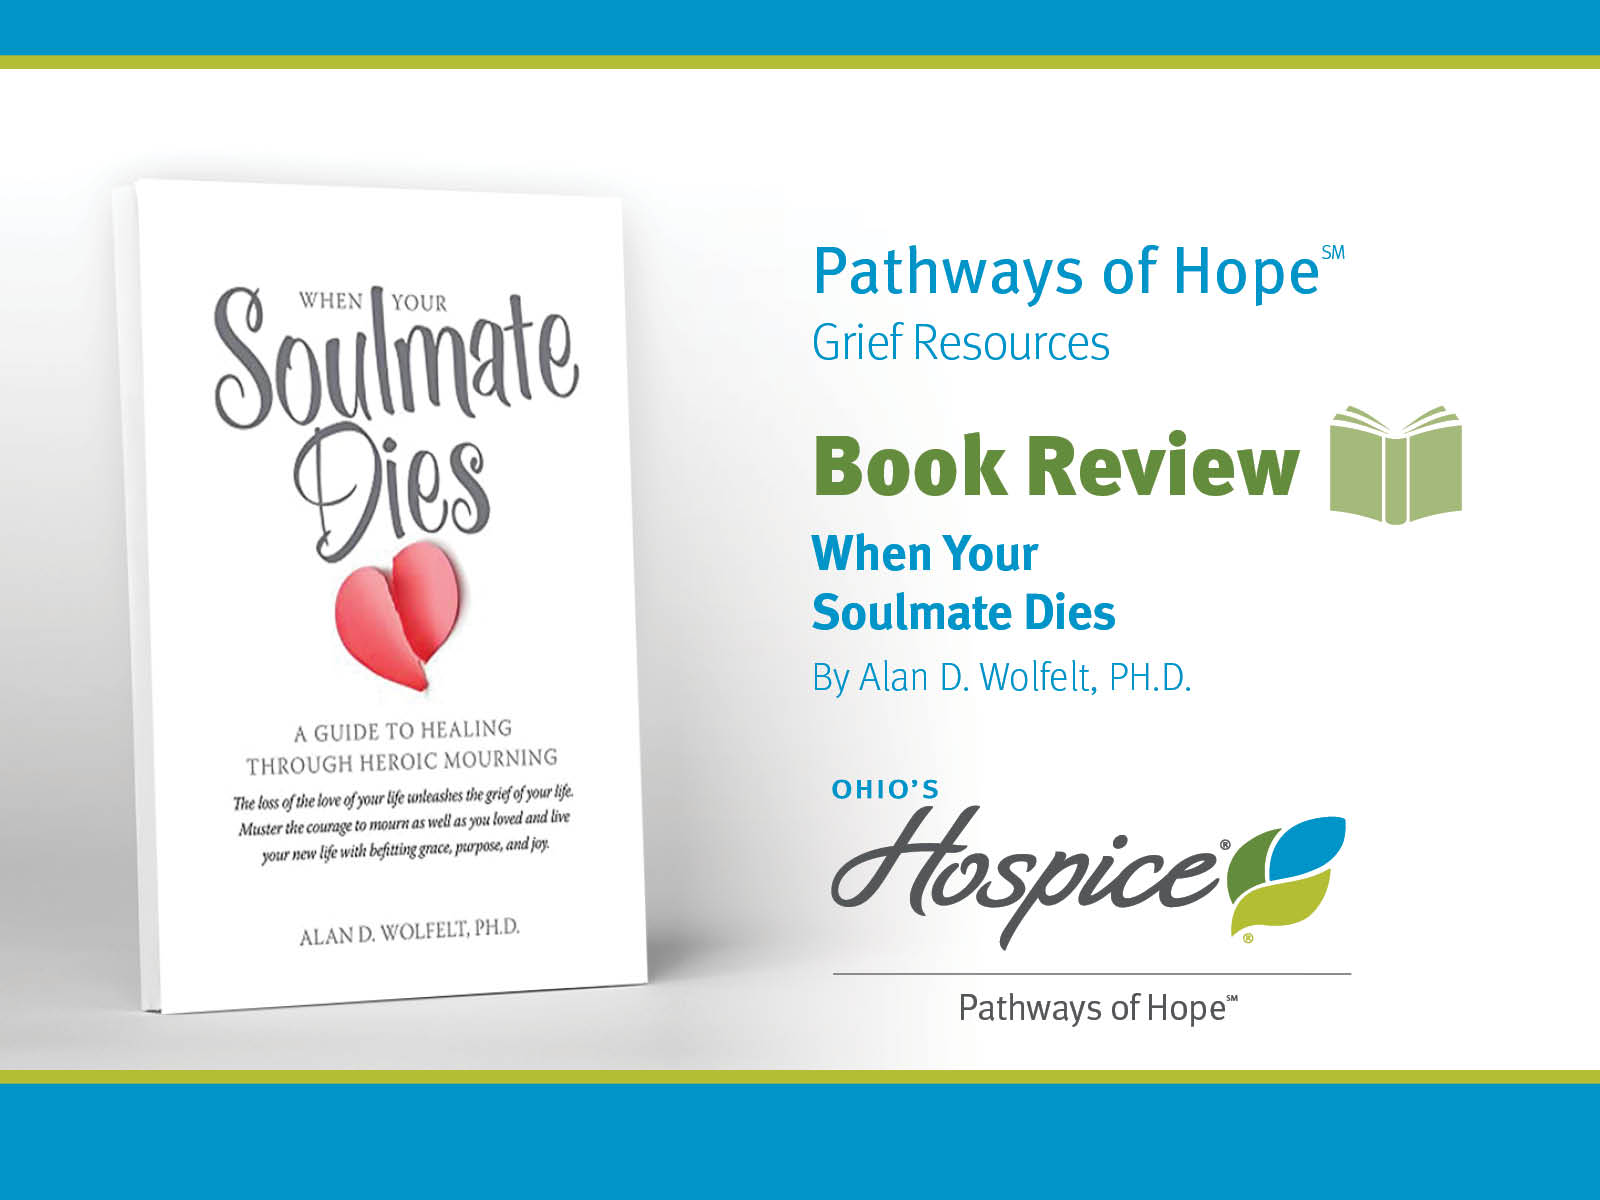 Pathways of Hope Grief Resources Book Review. When Your Soulmate Dies. By Alan Wolfelt, PH.D. Ohio's Hospice